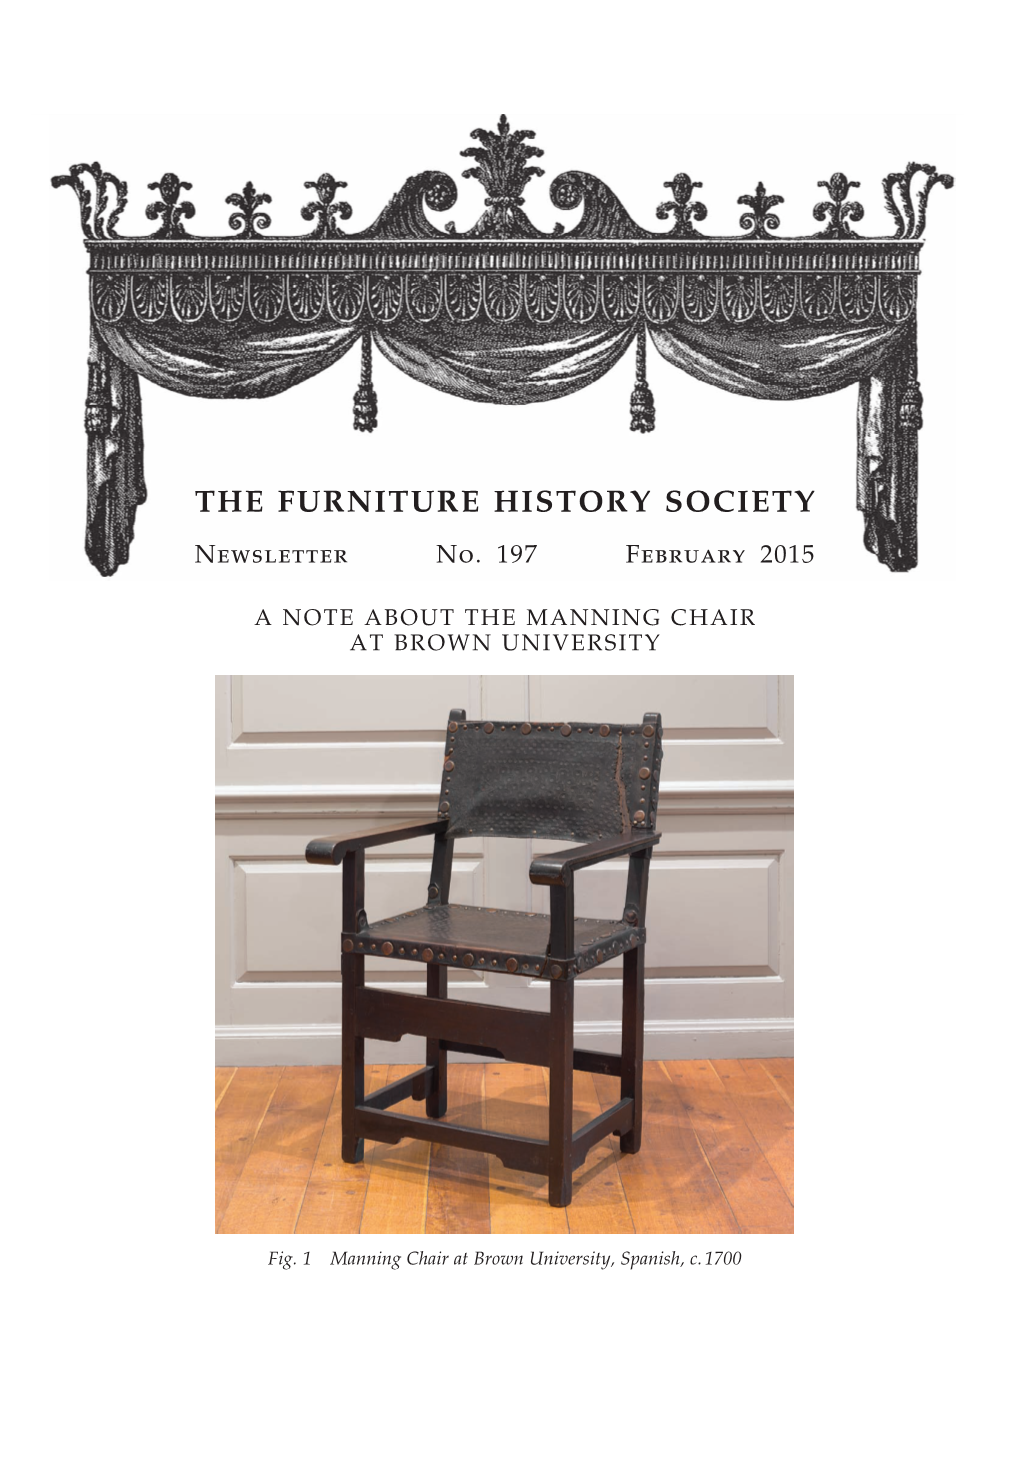 THE FURNITURE HISTORY SOCIETY Newsletter No